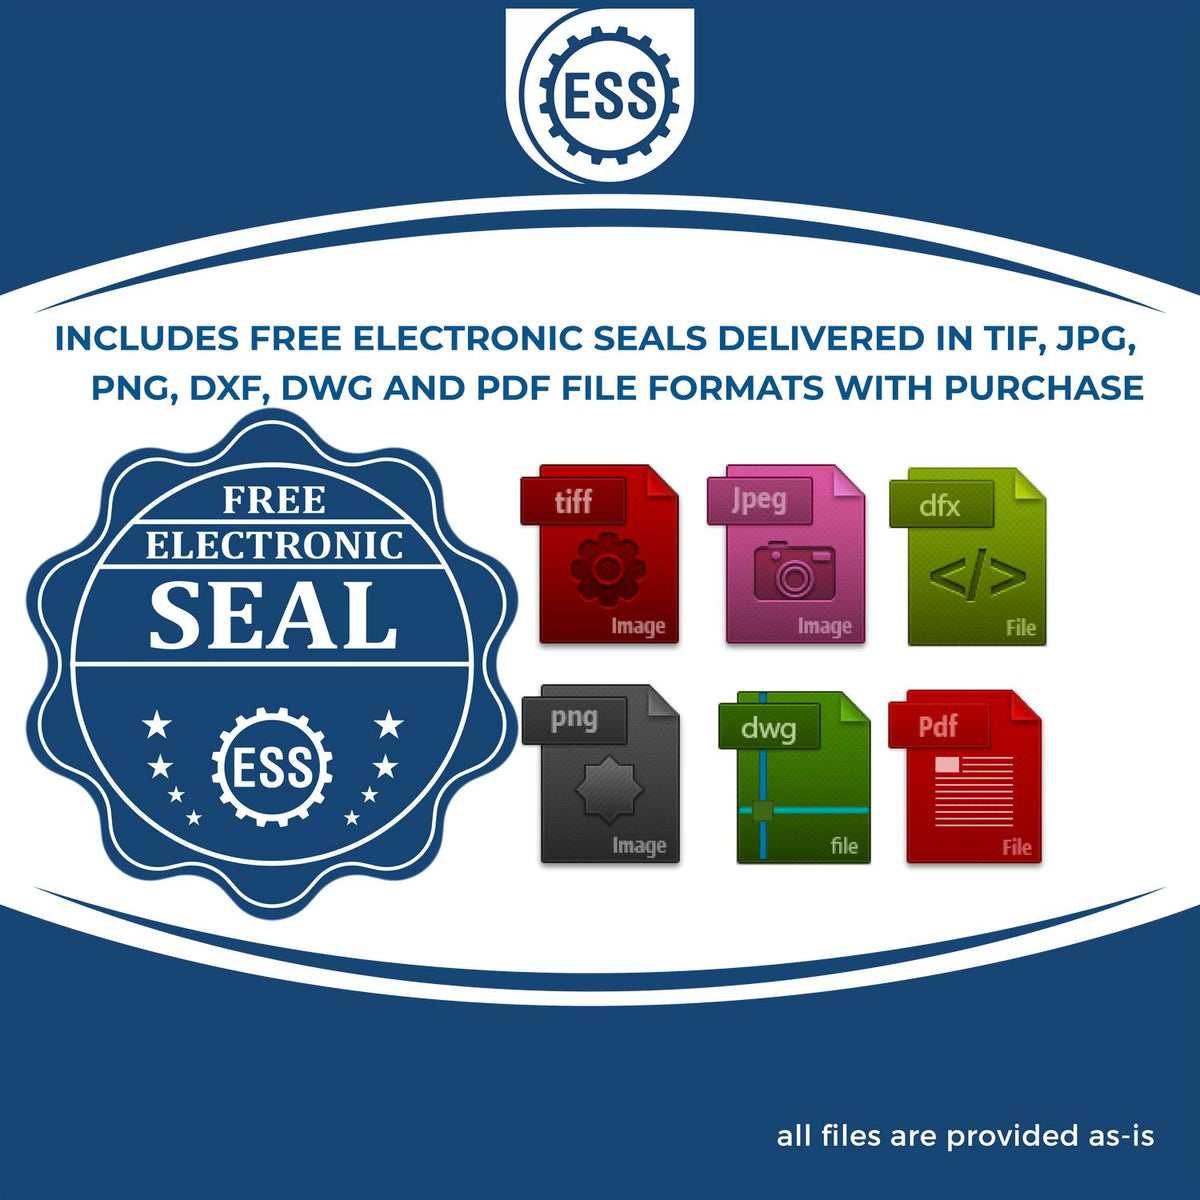 An infographic for the free electronic seal for the Washington Engineer Desk Seal illustrating the different file type icons such as DXF, DWG, TIF, JPG and PNG.